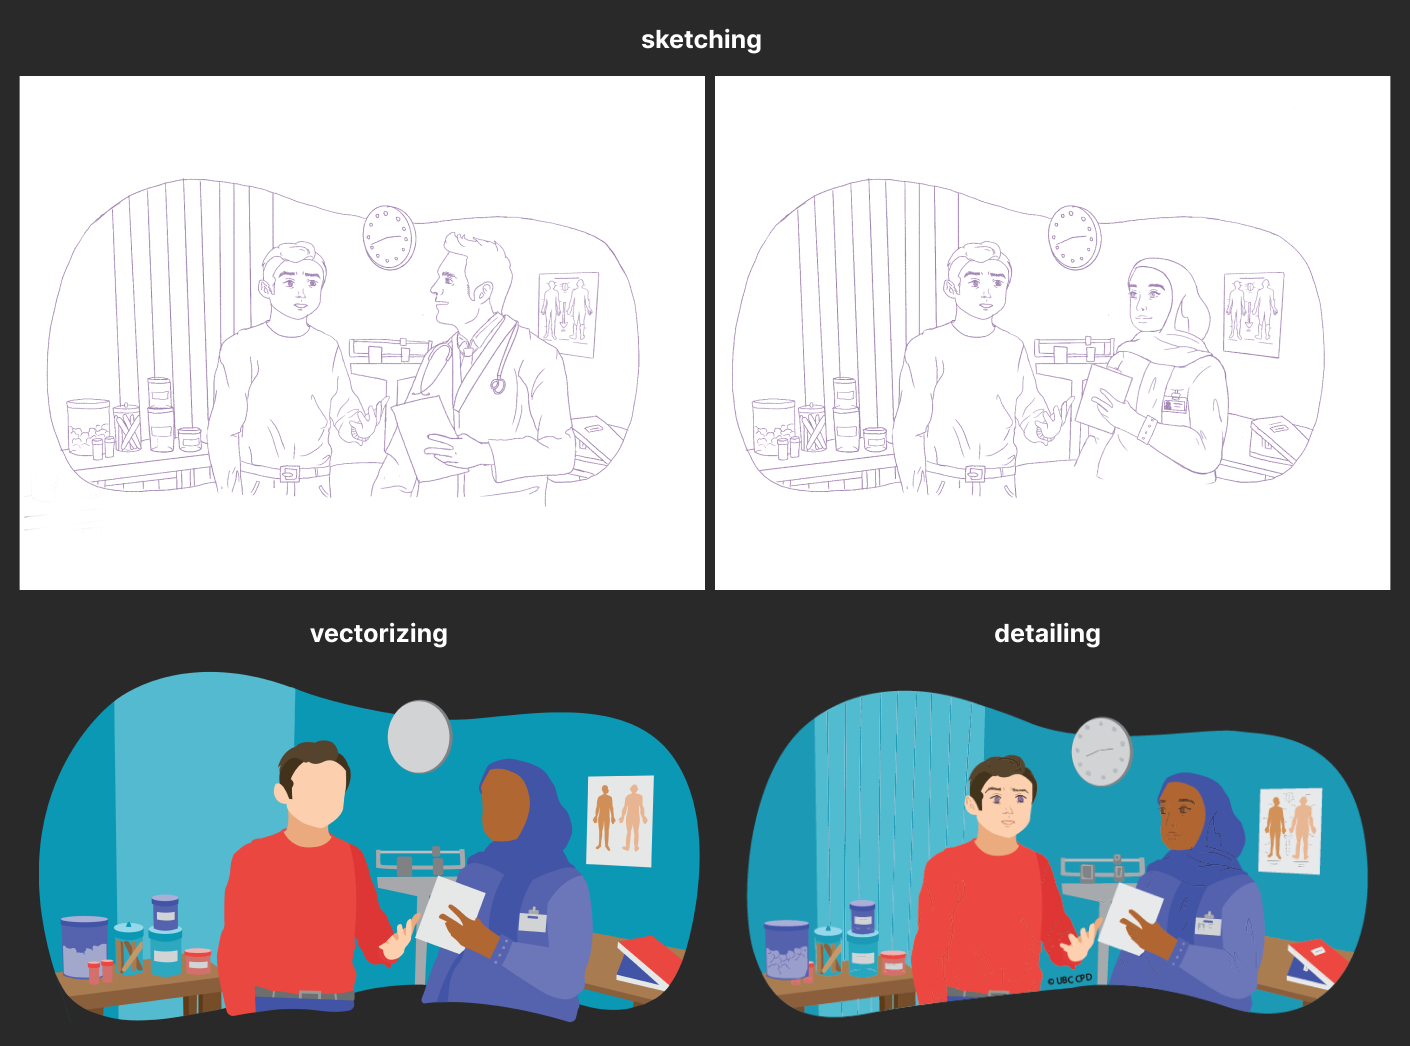 Example of an illustration with these 3 steps